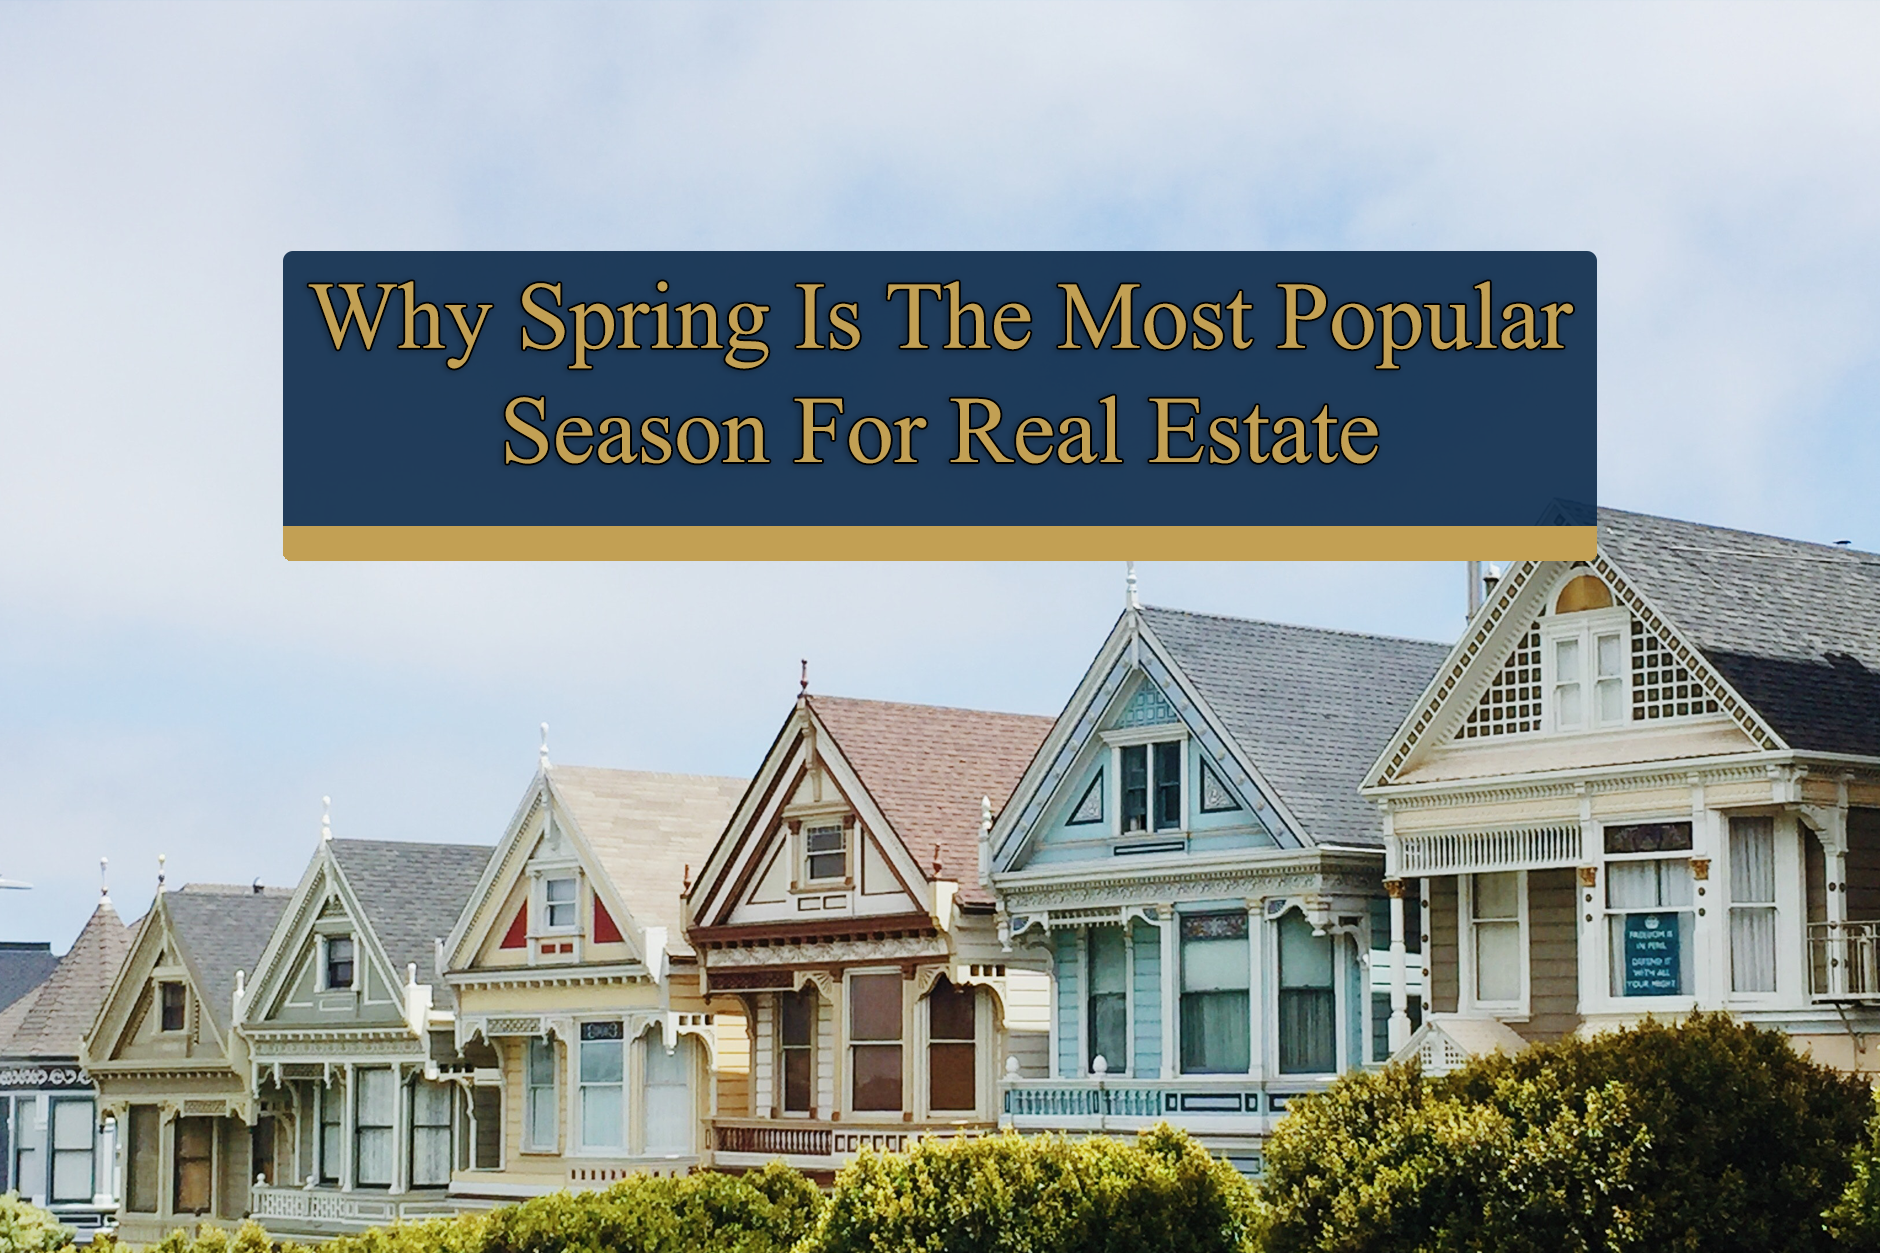 Why Spring Is The Most Popular Season For Real Estate